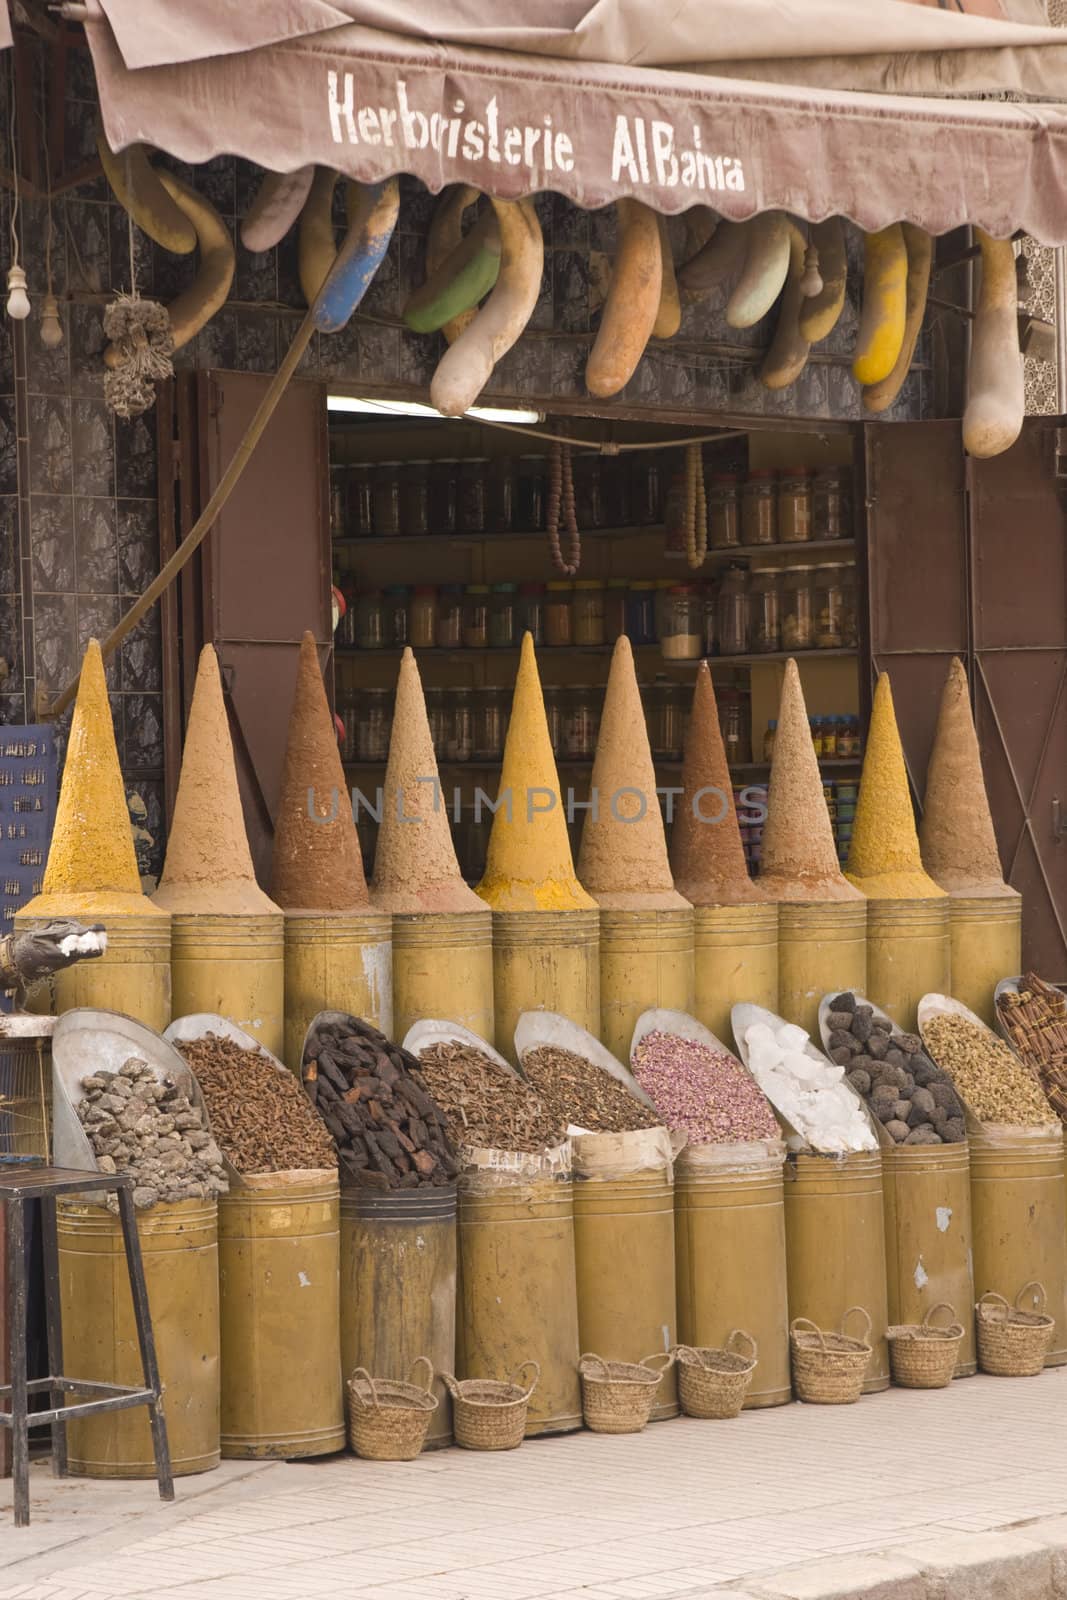 Display of spices outside a shop in the old city of Marrakesh, Morocco